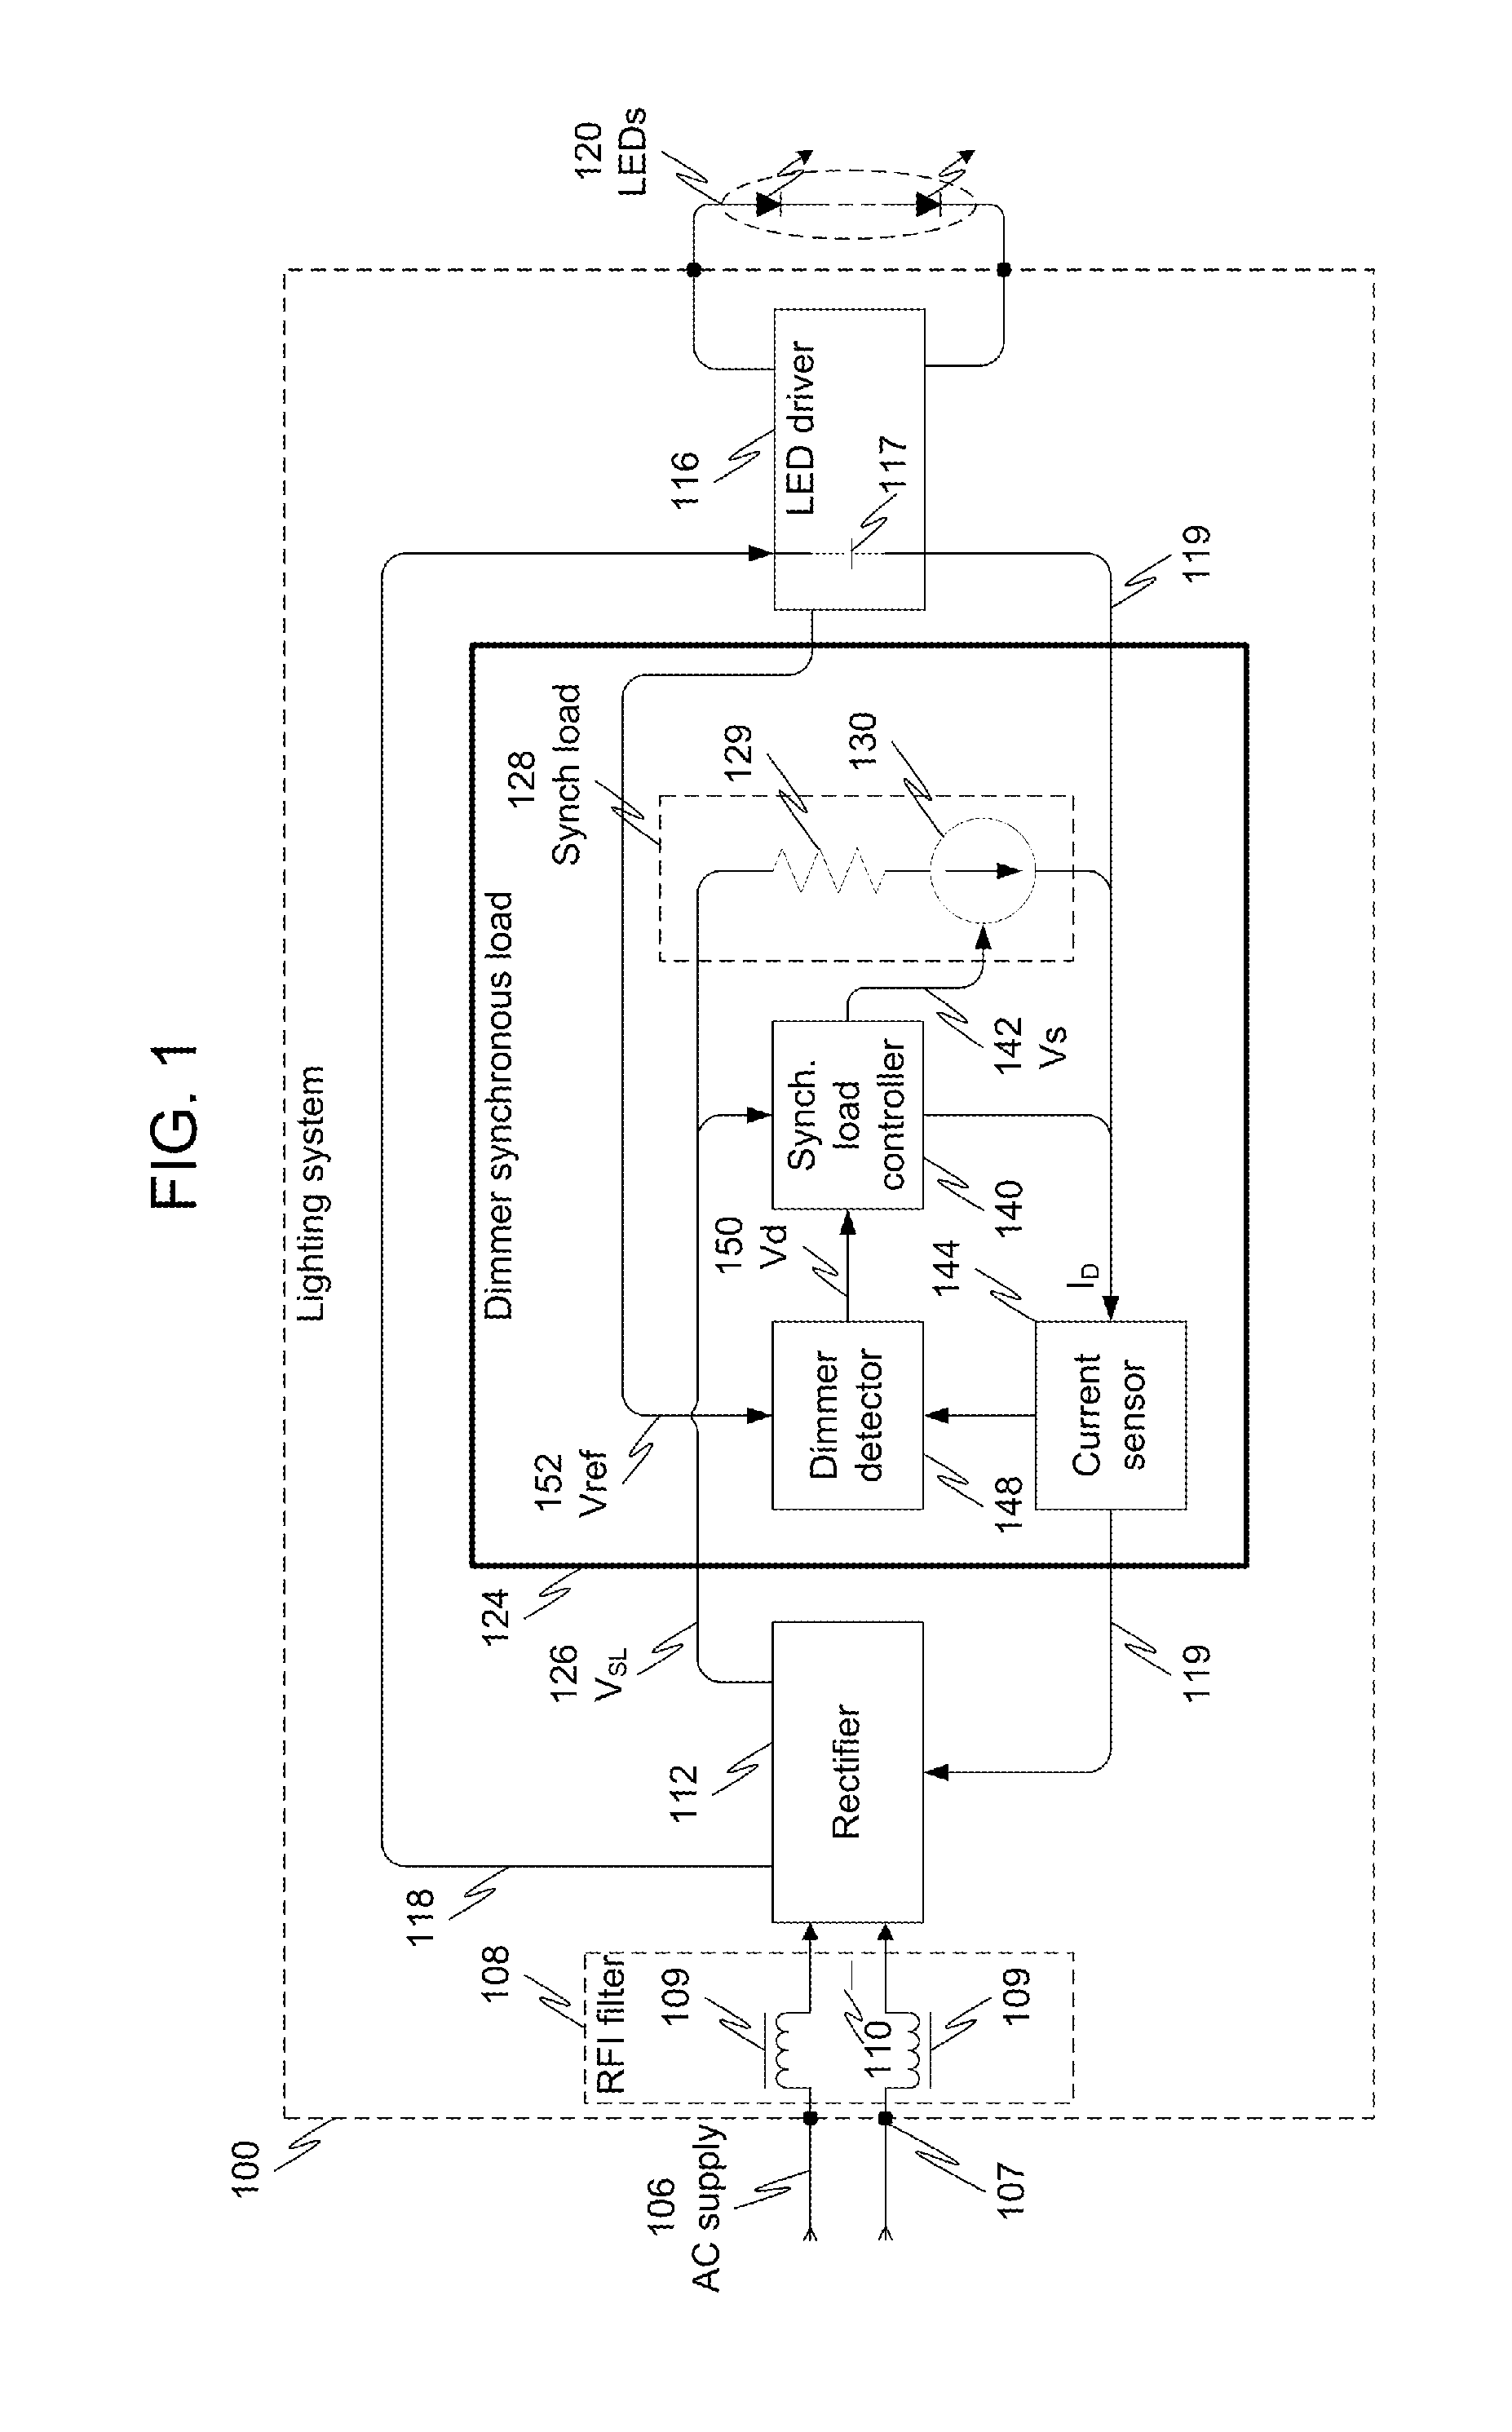 Lighting dimmer synchronous load device